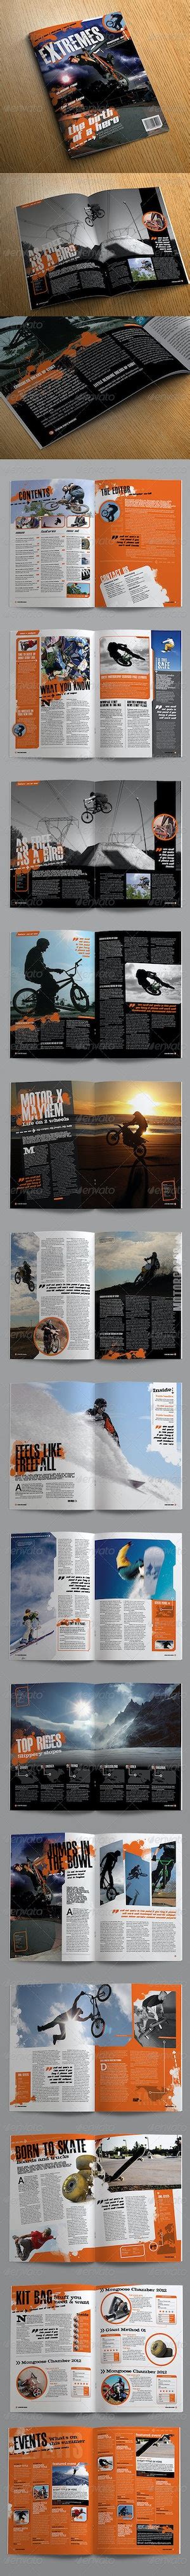 Extreme Magazine Template By Crsdesign Graphicriver